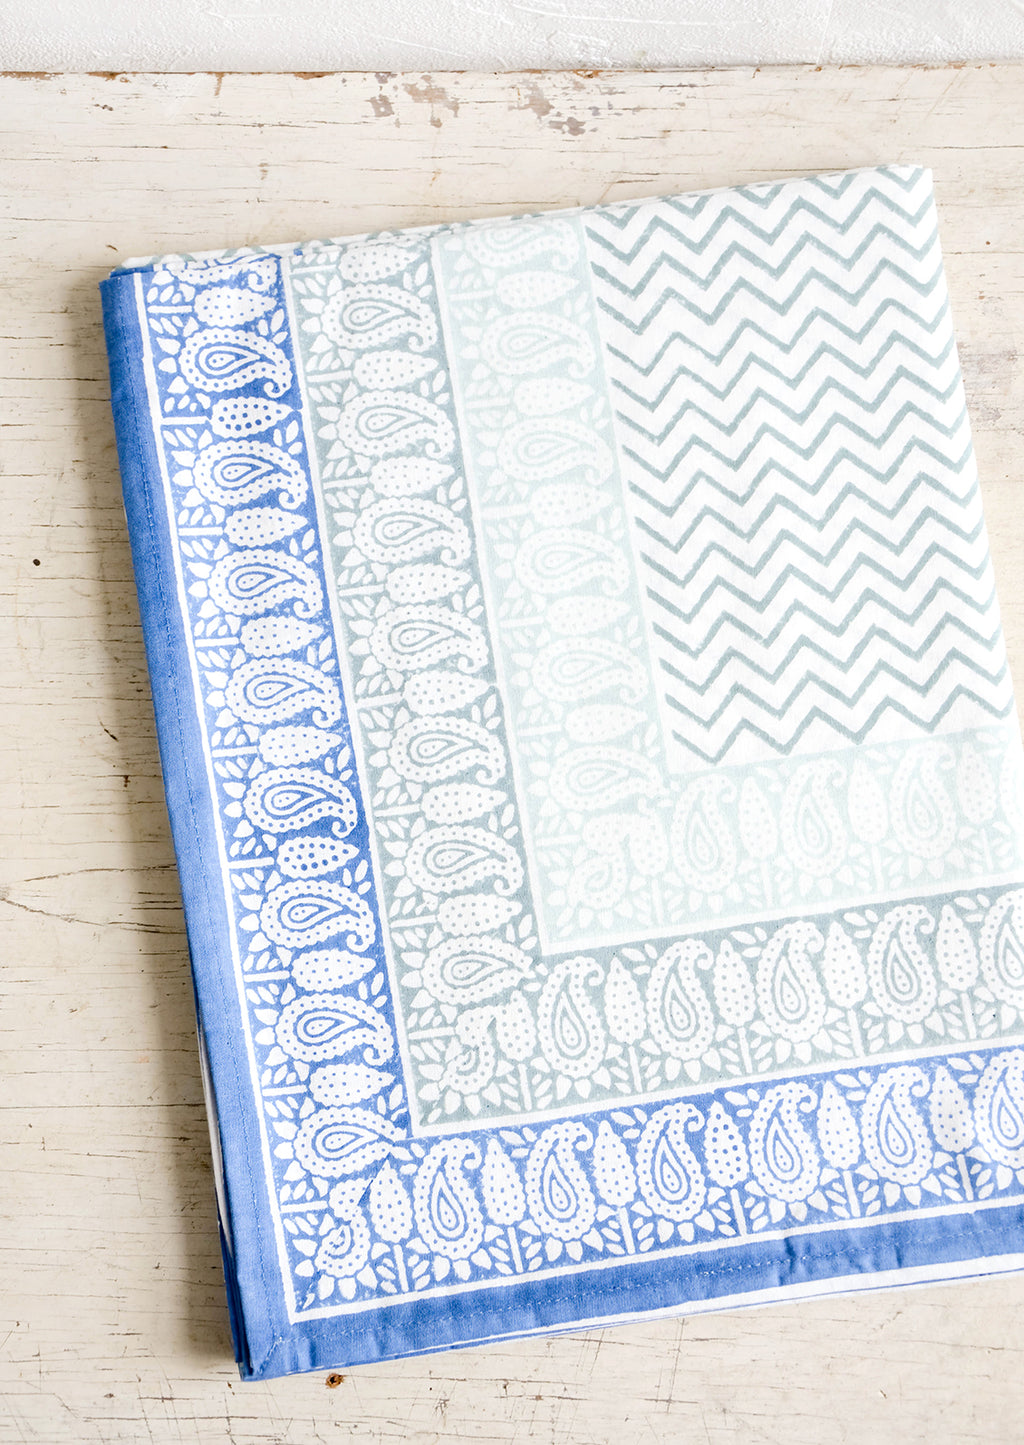 1: Chevron patterned tablecloth with paisley border in shades of blue, folded on a table